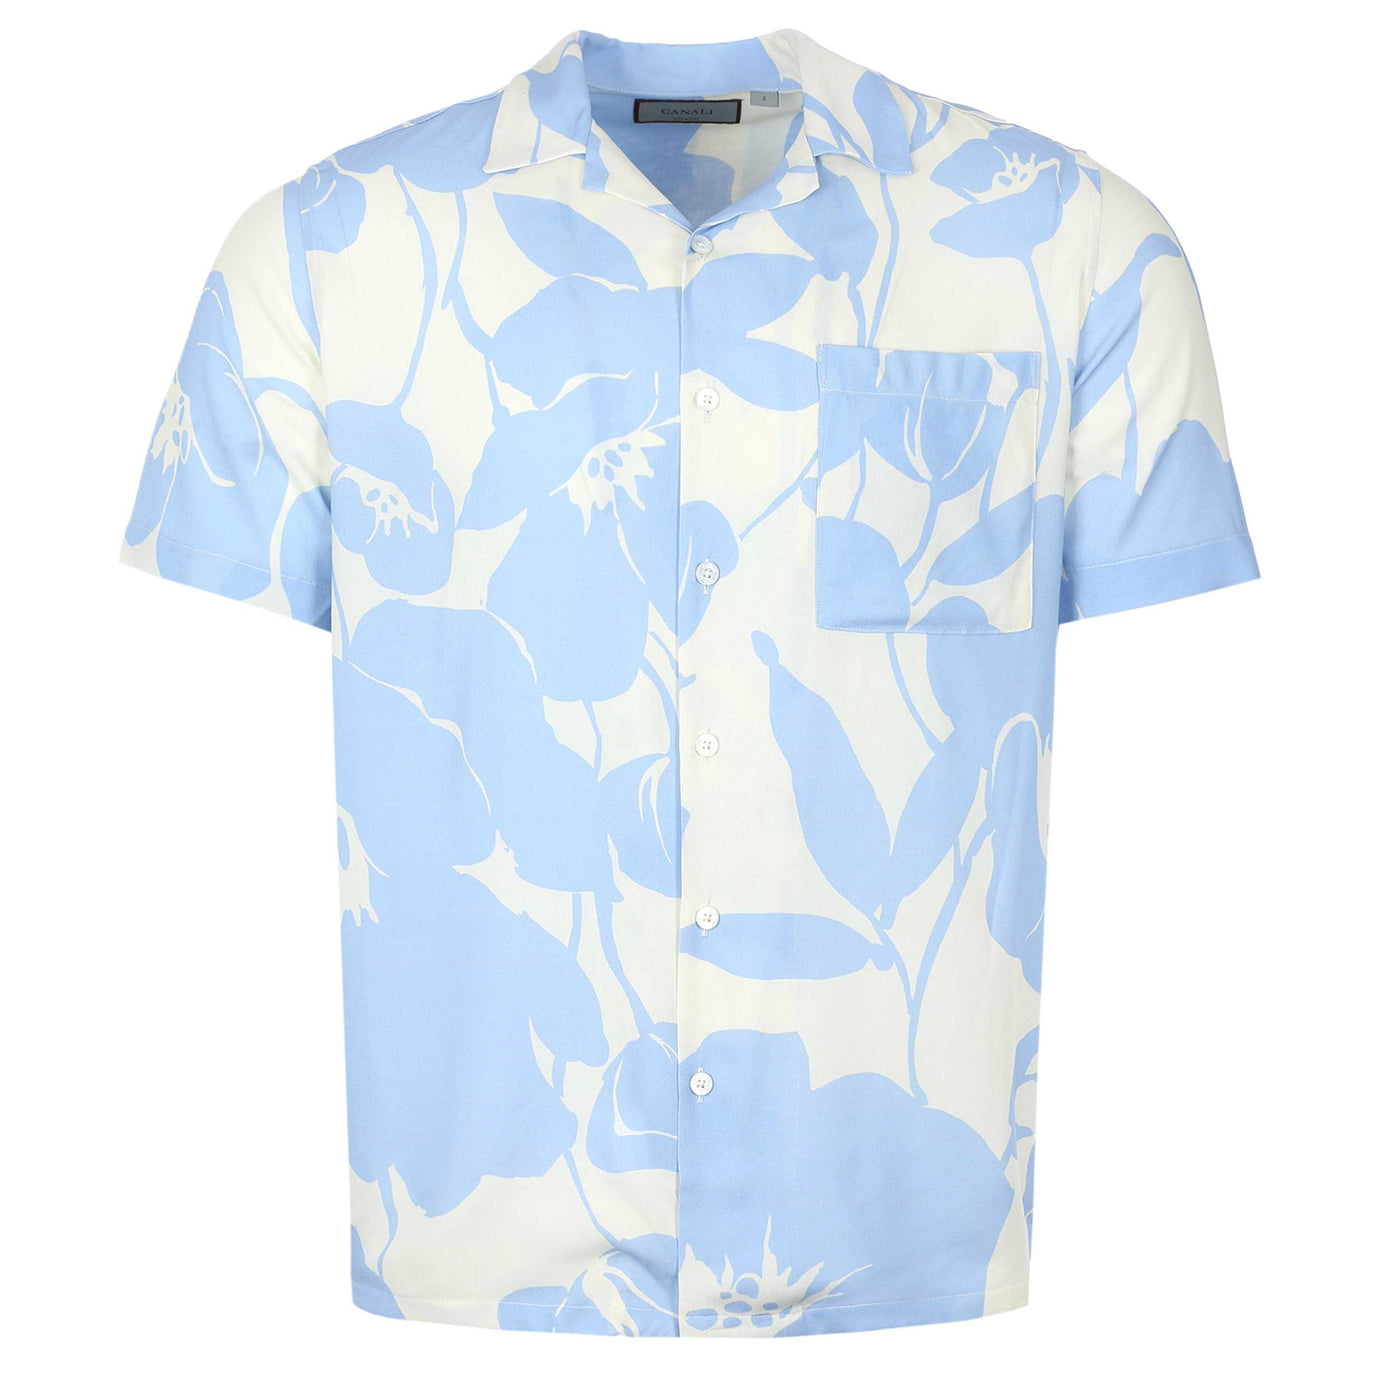 Canali Sky Blue Floral SS Shirt in Light Blue Floral